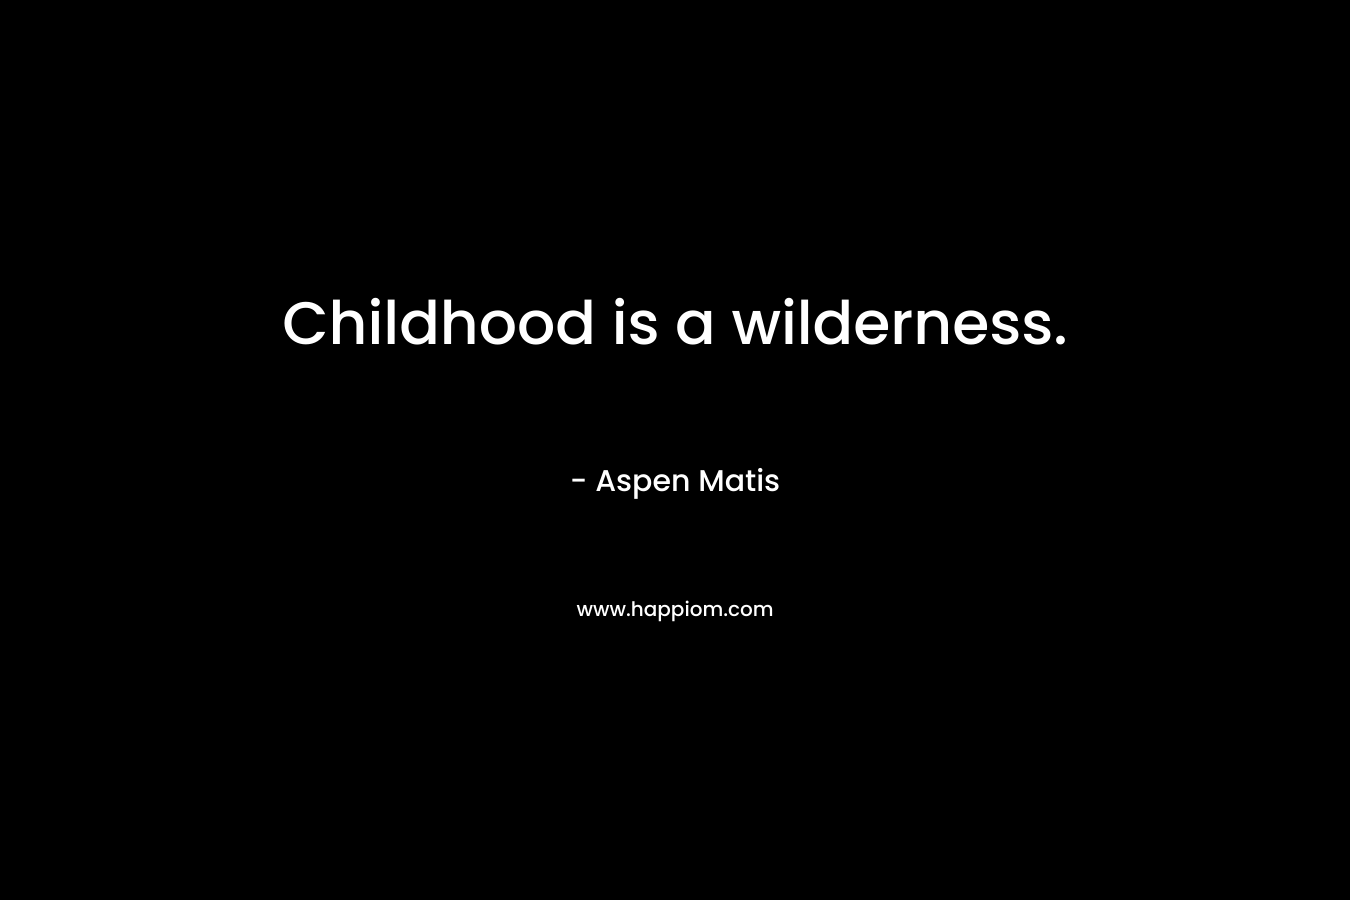 Childhood is a wilderness.